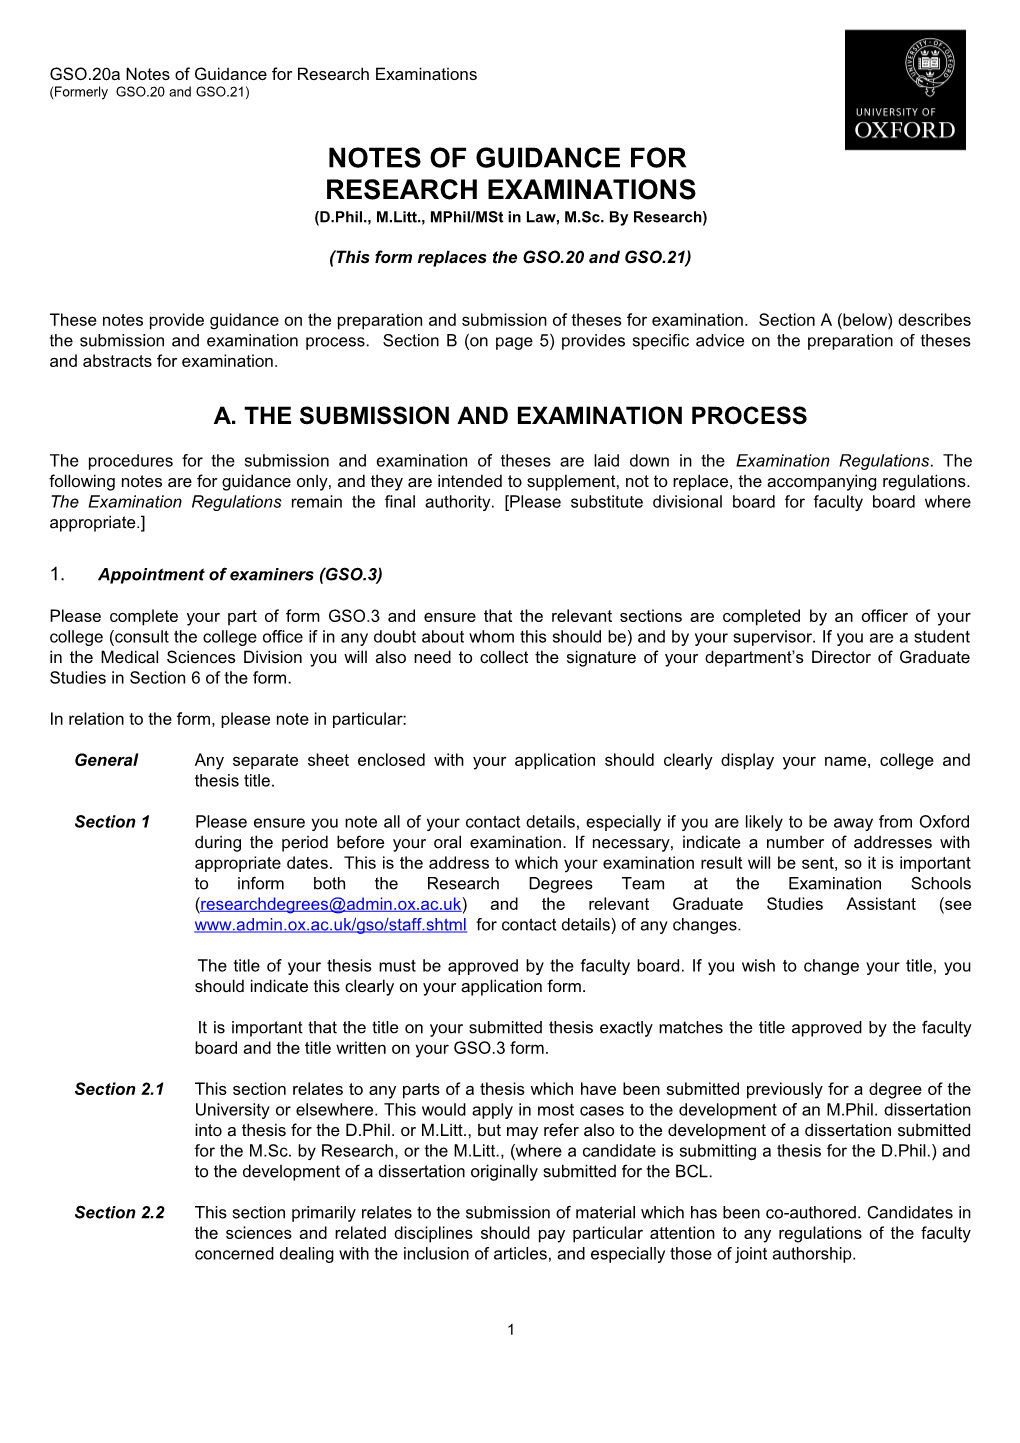 A. the Submission and Examination Process